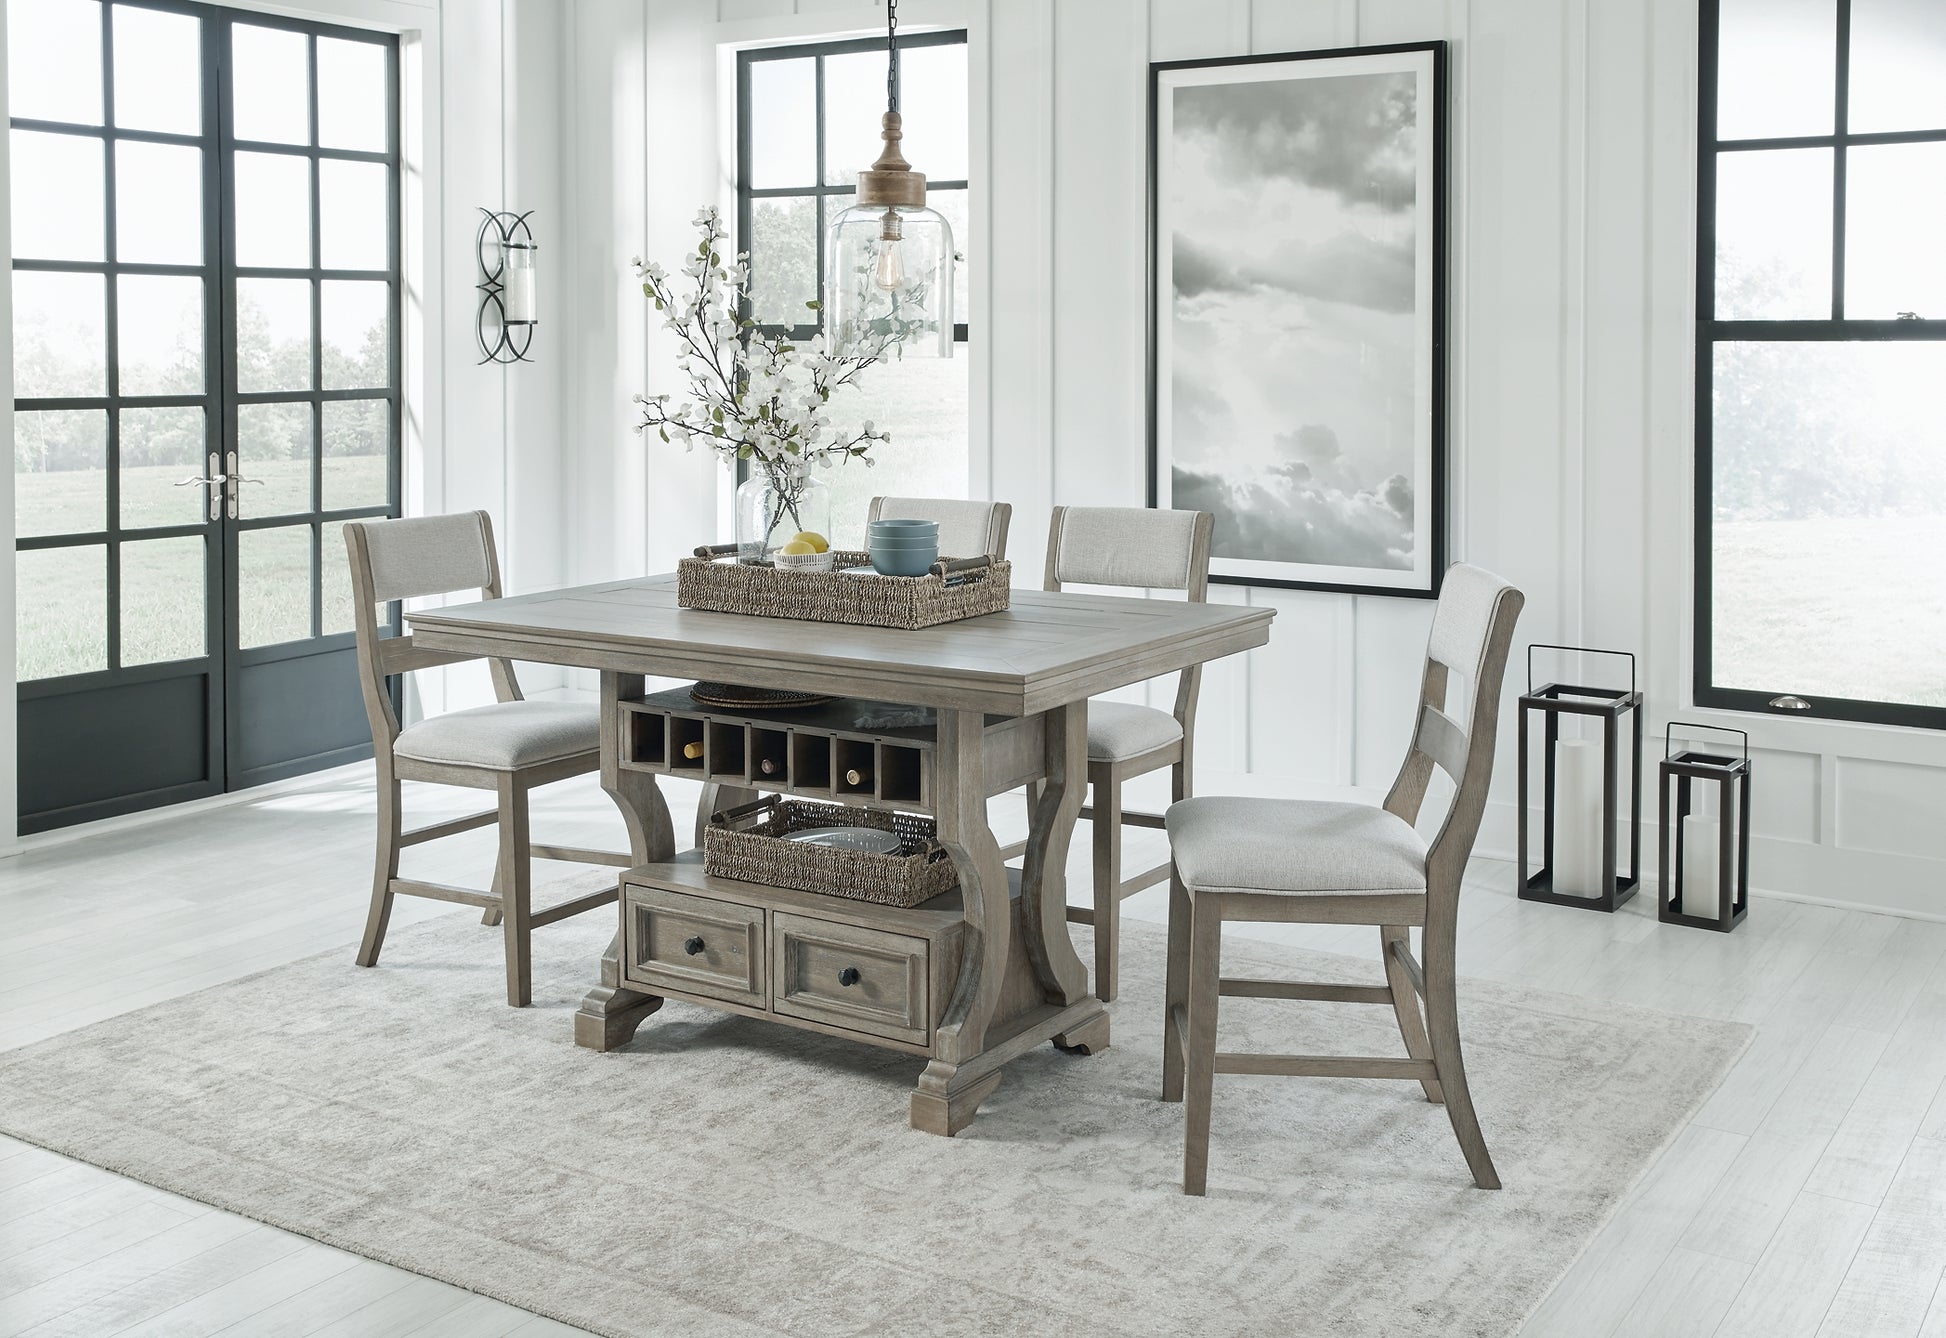 Moreshire Counter Height Dining Table and 4 Barstools Wilson Furniture (OH)  in Bridgeport, Ohio. Serving Bridgeport, Yorkville, Bellaire, & Avondale